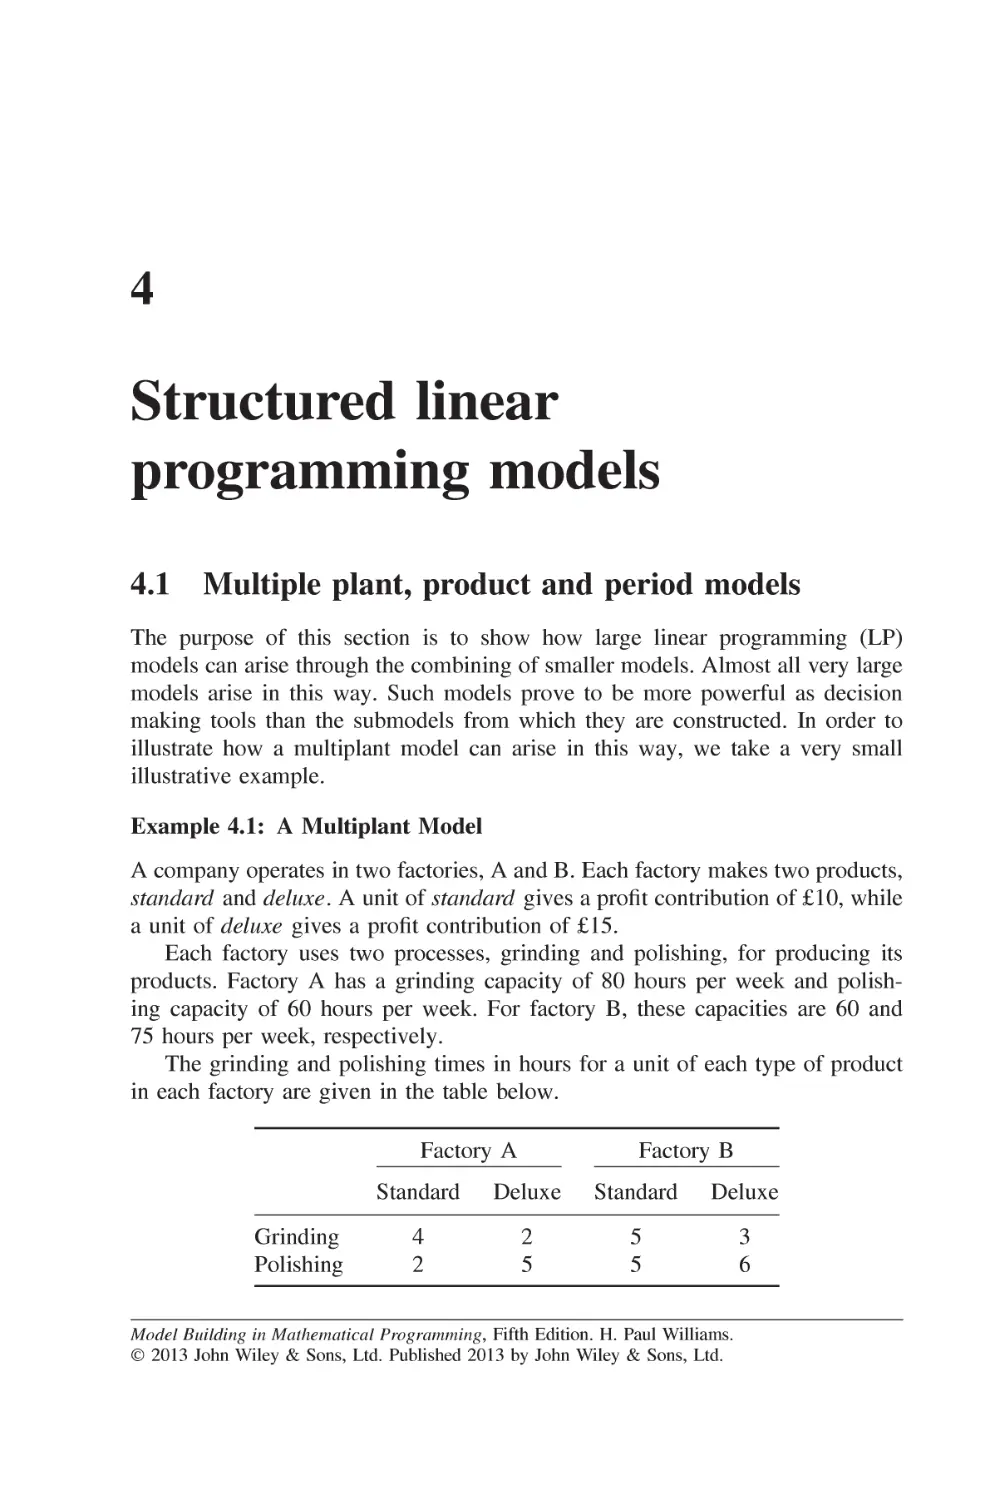 Chapter 4 Structured linear programming models